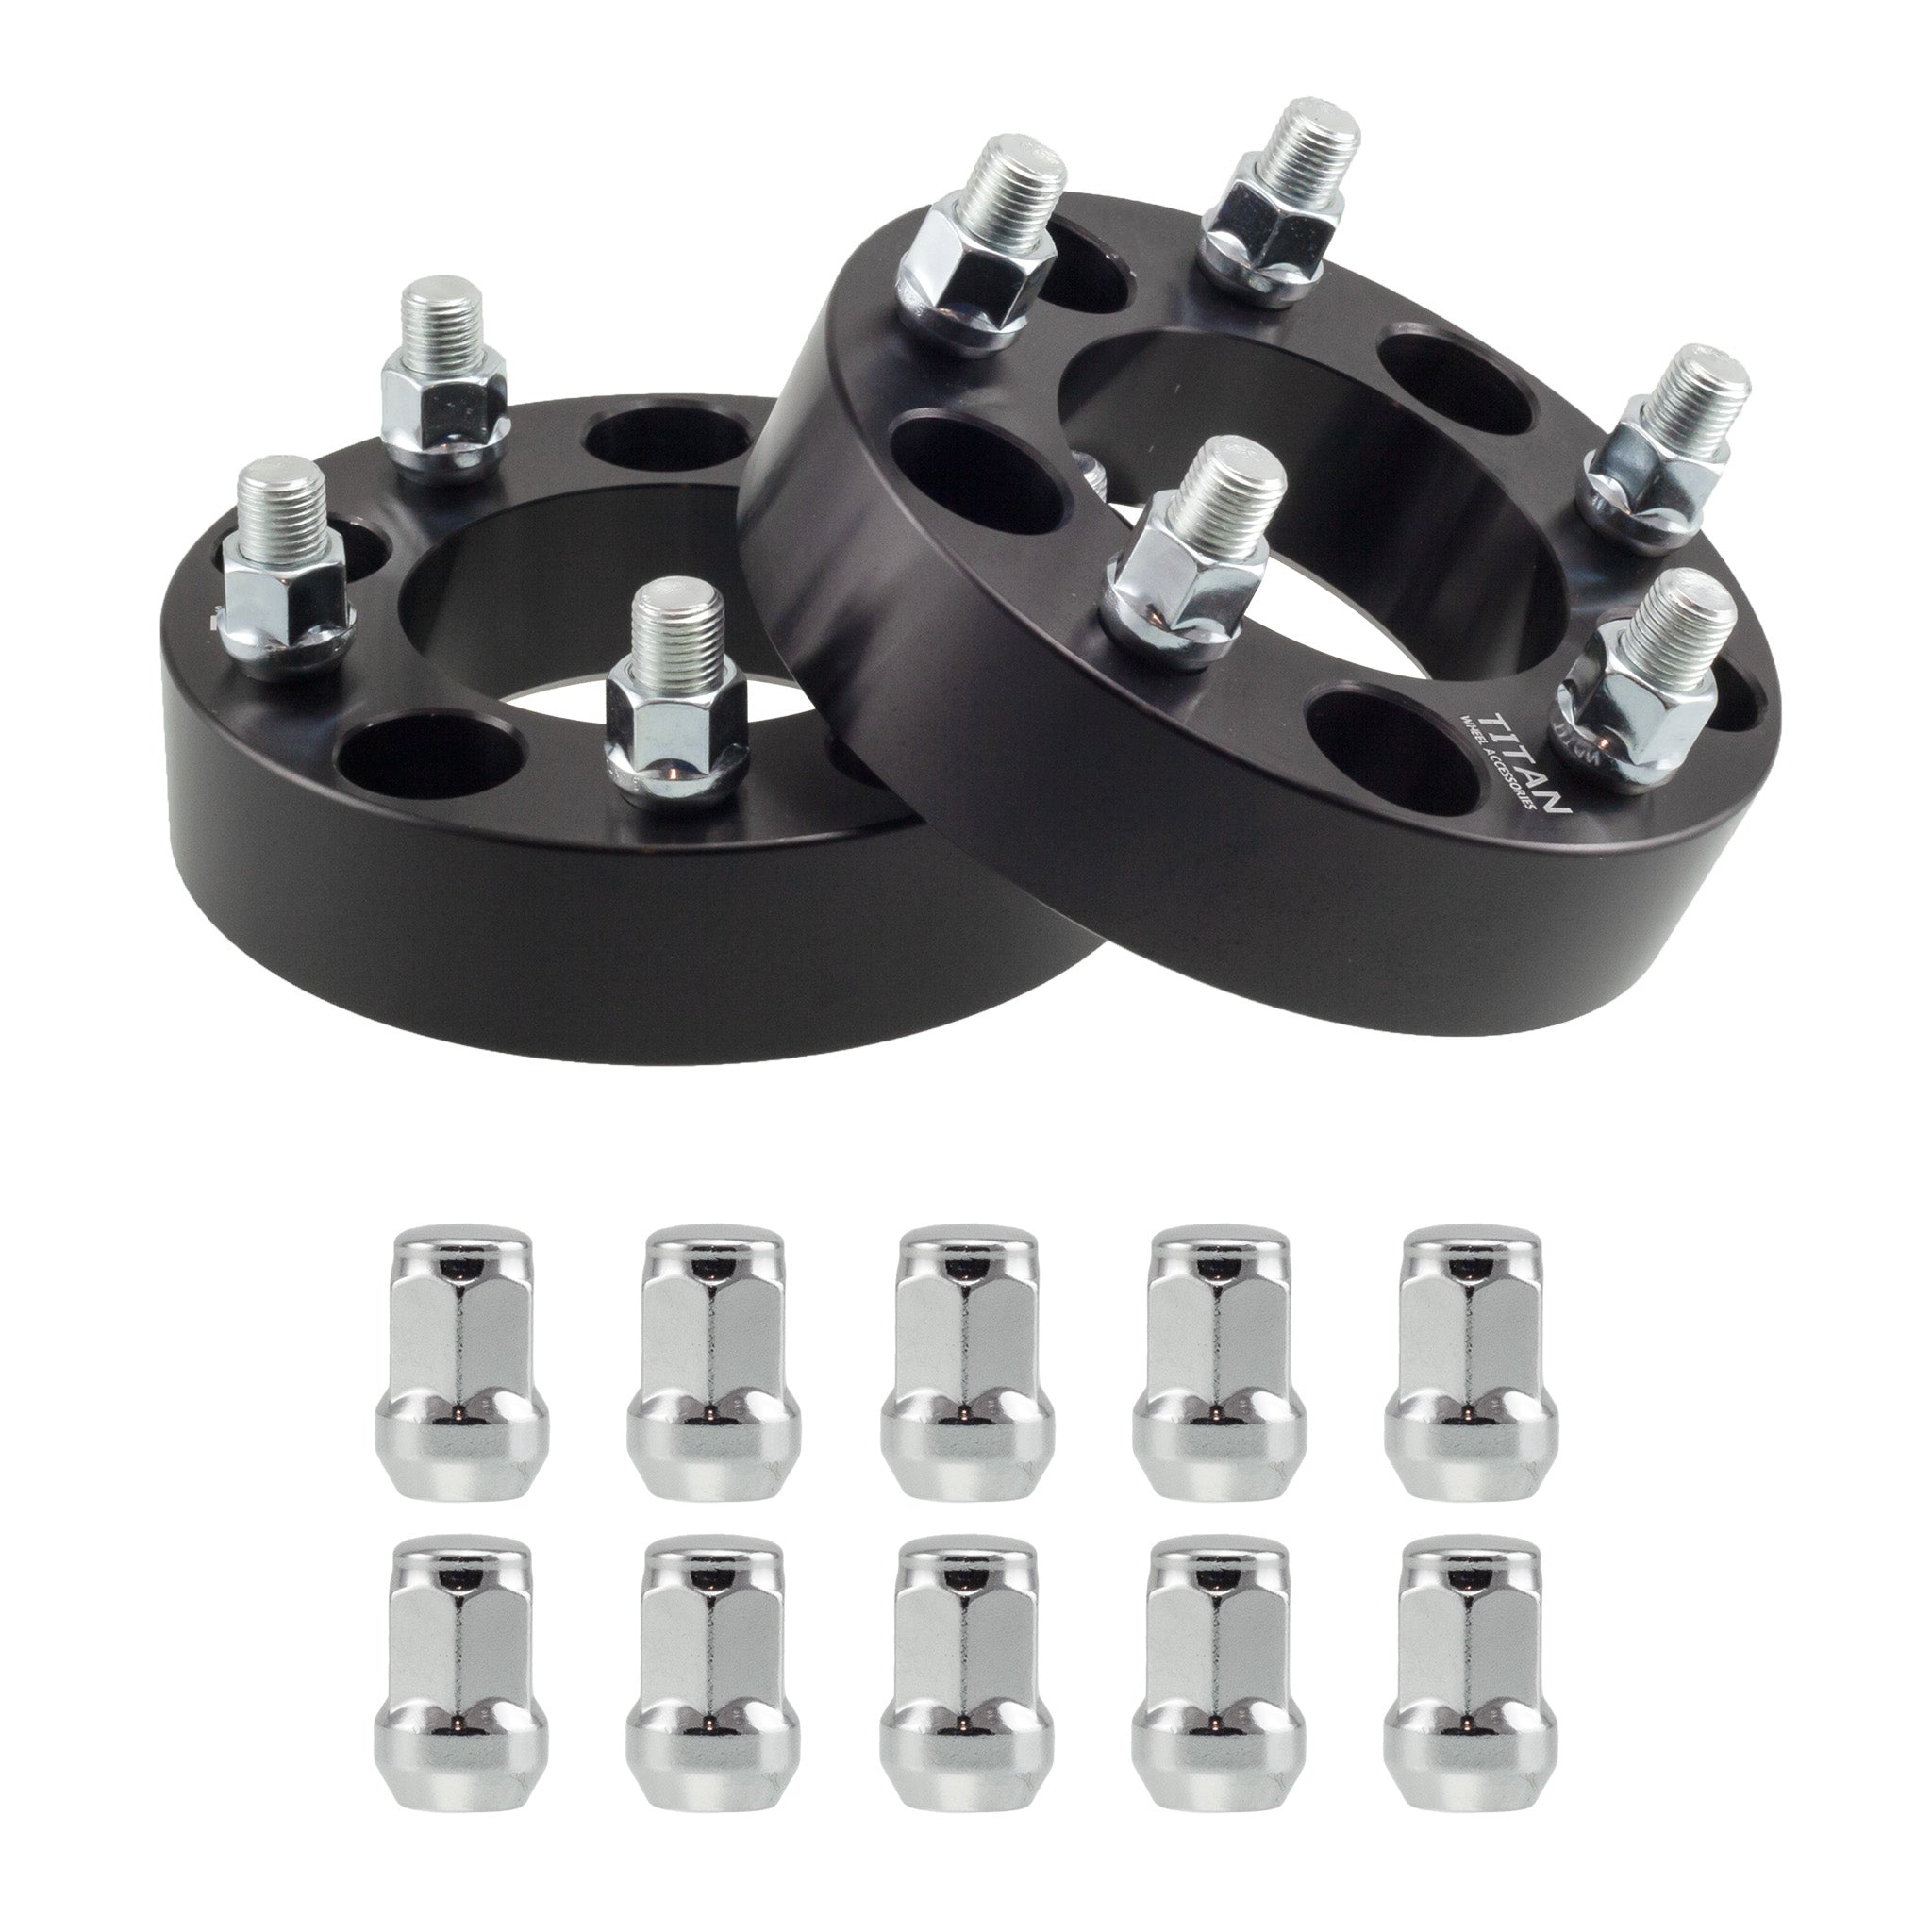 2 Inch Hubcentric Wheel Spacers for Acura TSX TL Honda Civic